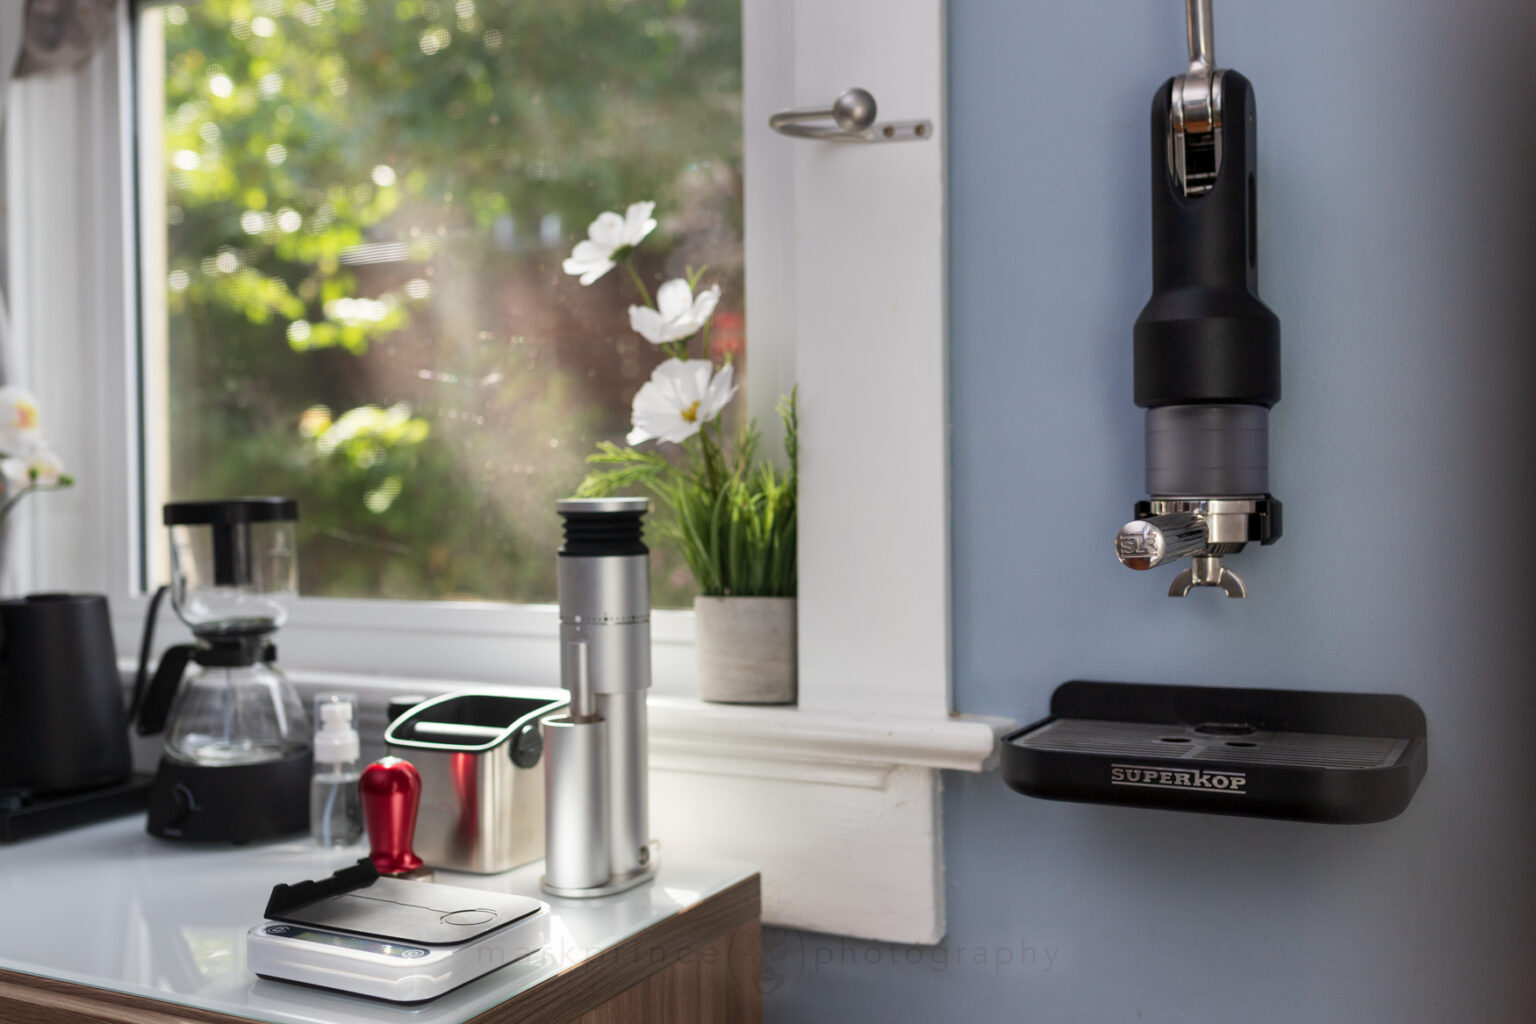 A brewing station at home with a wall mounted espresso machine.